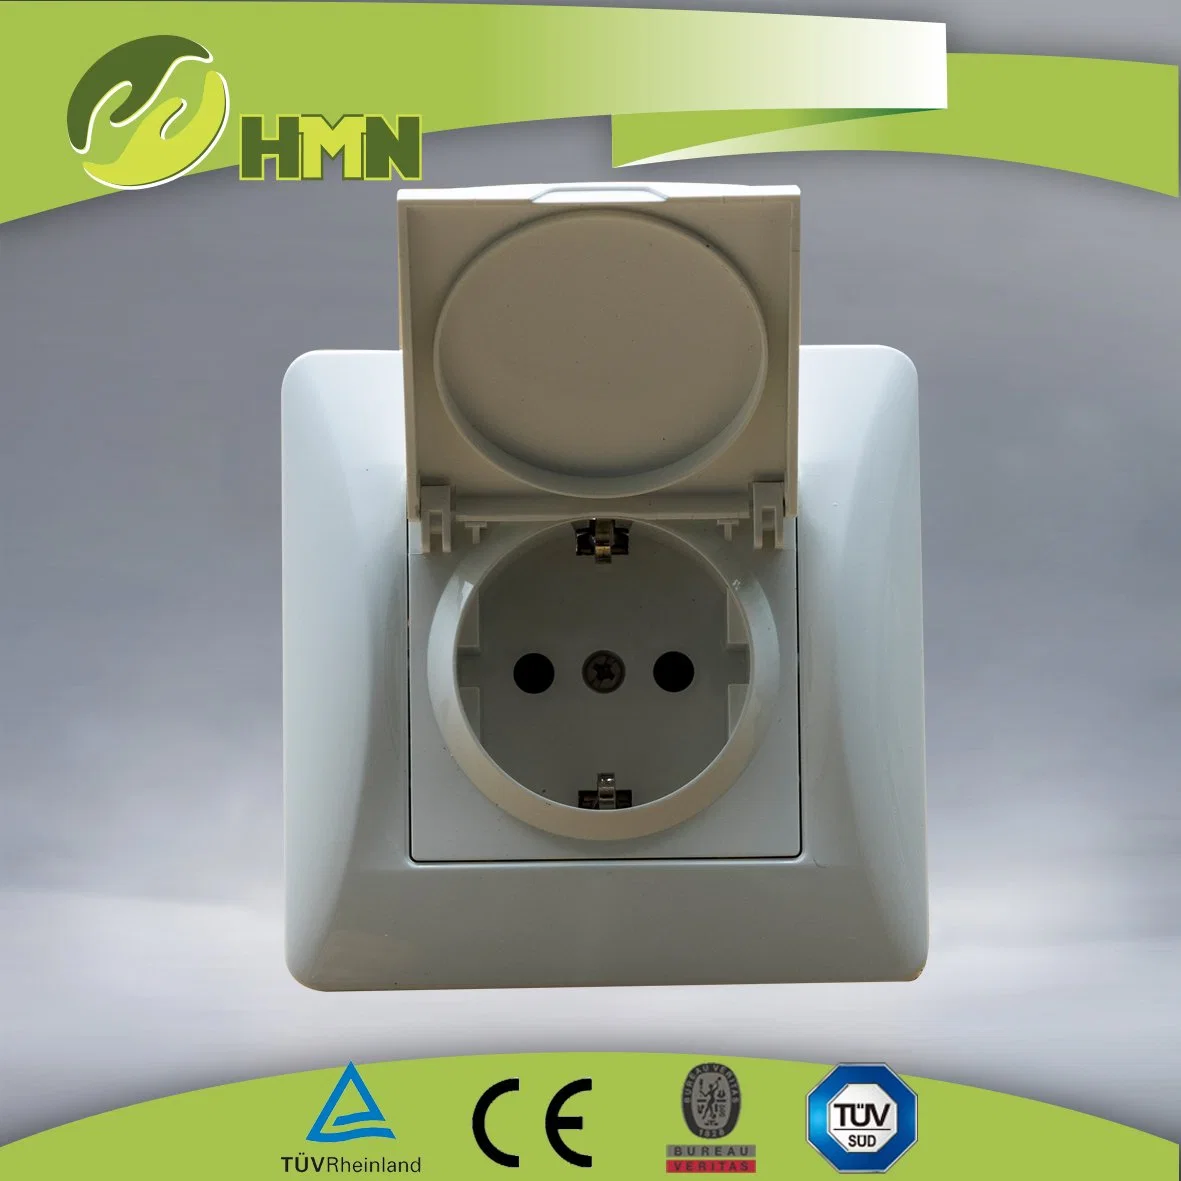 EU Standard Plastic Material European 2 pin German Schuko Electric Wall Socket with dust Cover